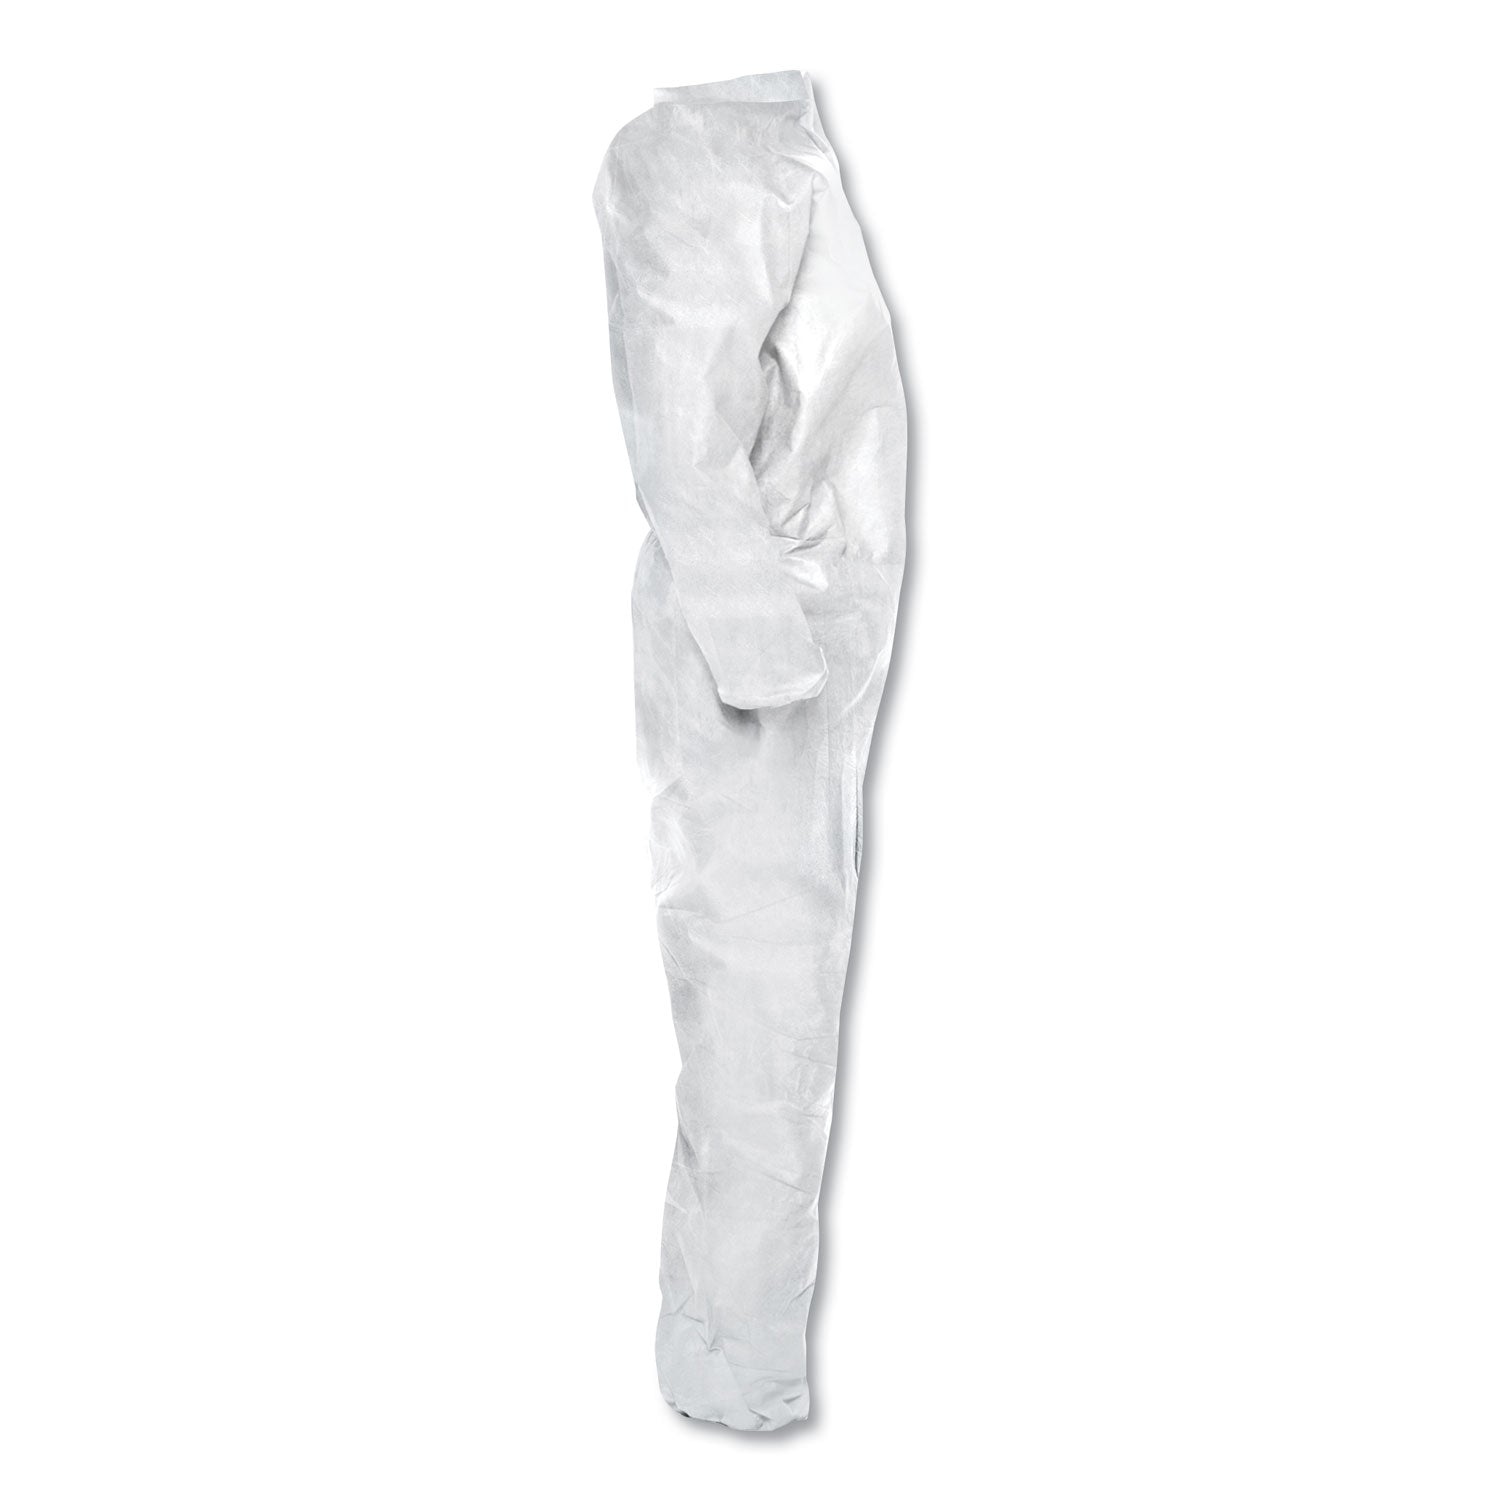 a20-breathable-particle-protection-coveralls-zip-closure-2x-large-white_kcc49105 - 5